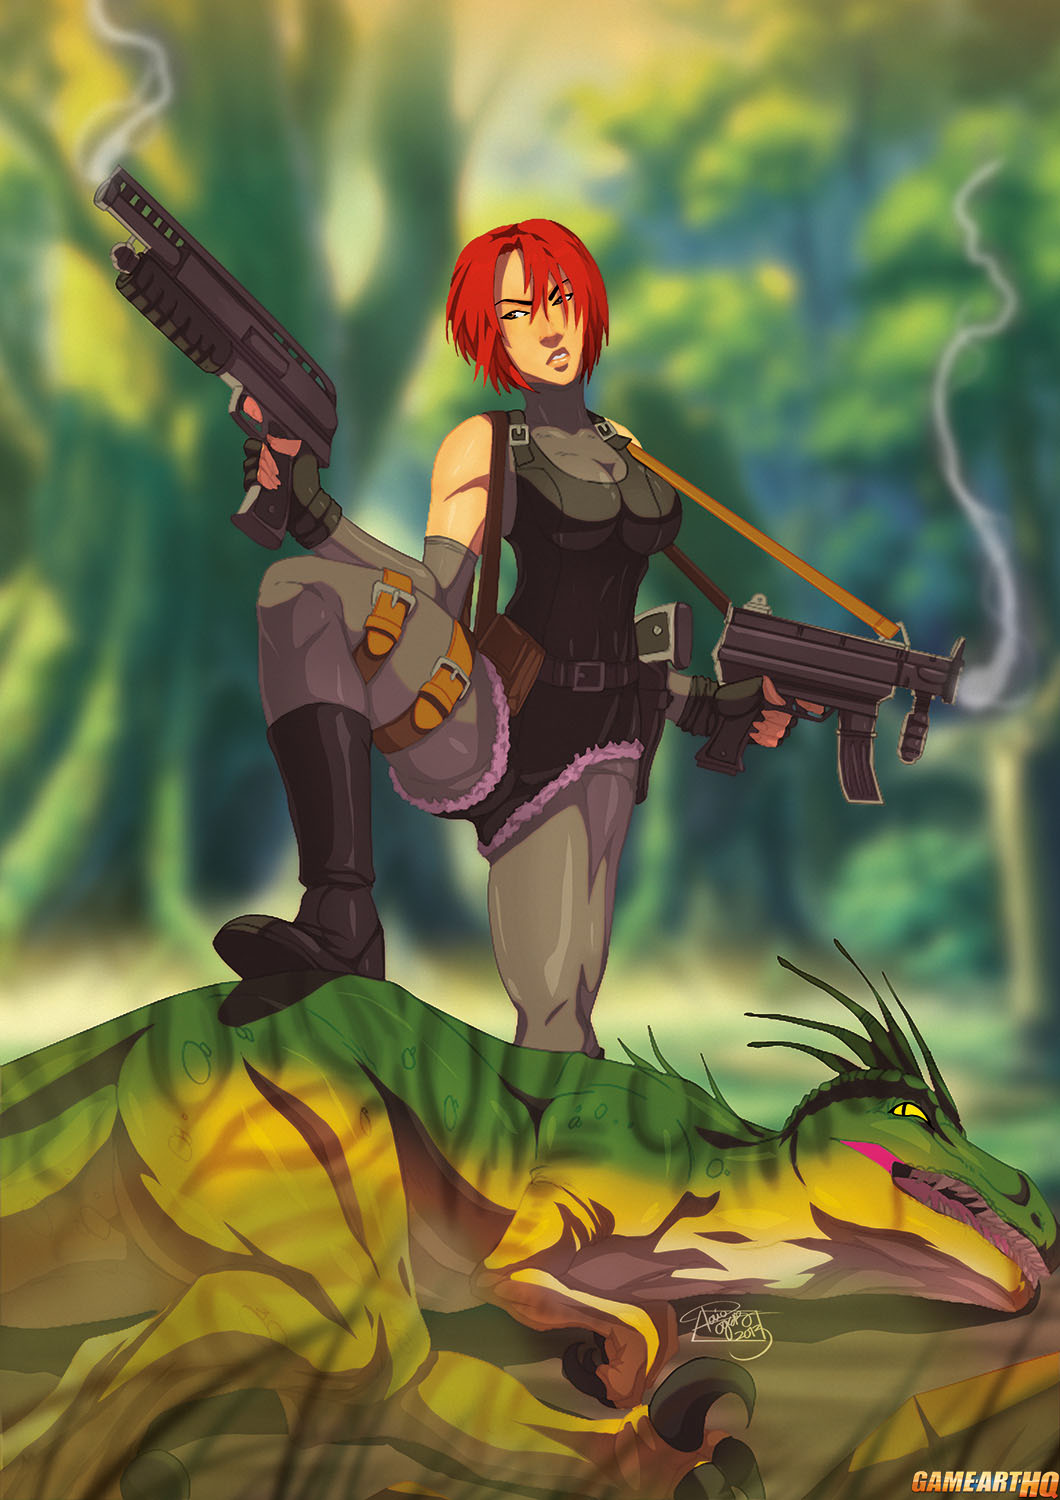 A Blast from the Past: Regina from Dino Crisis.